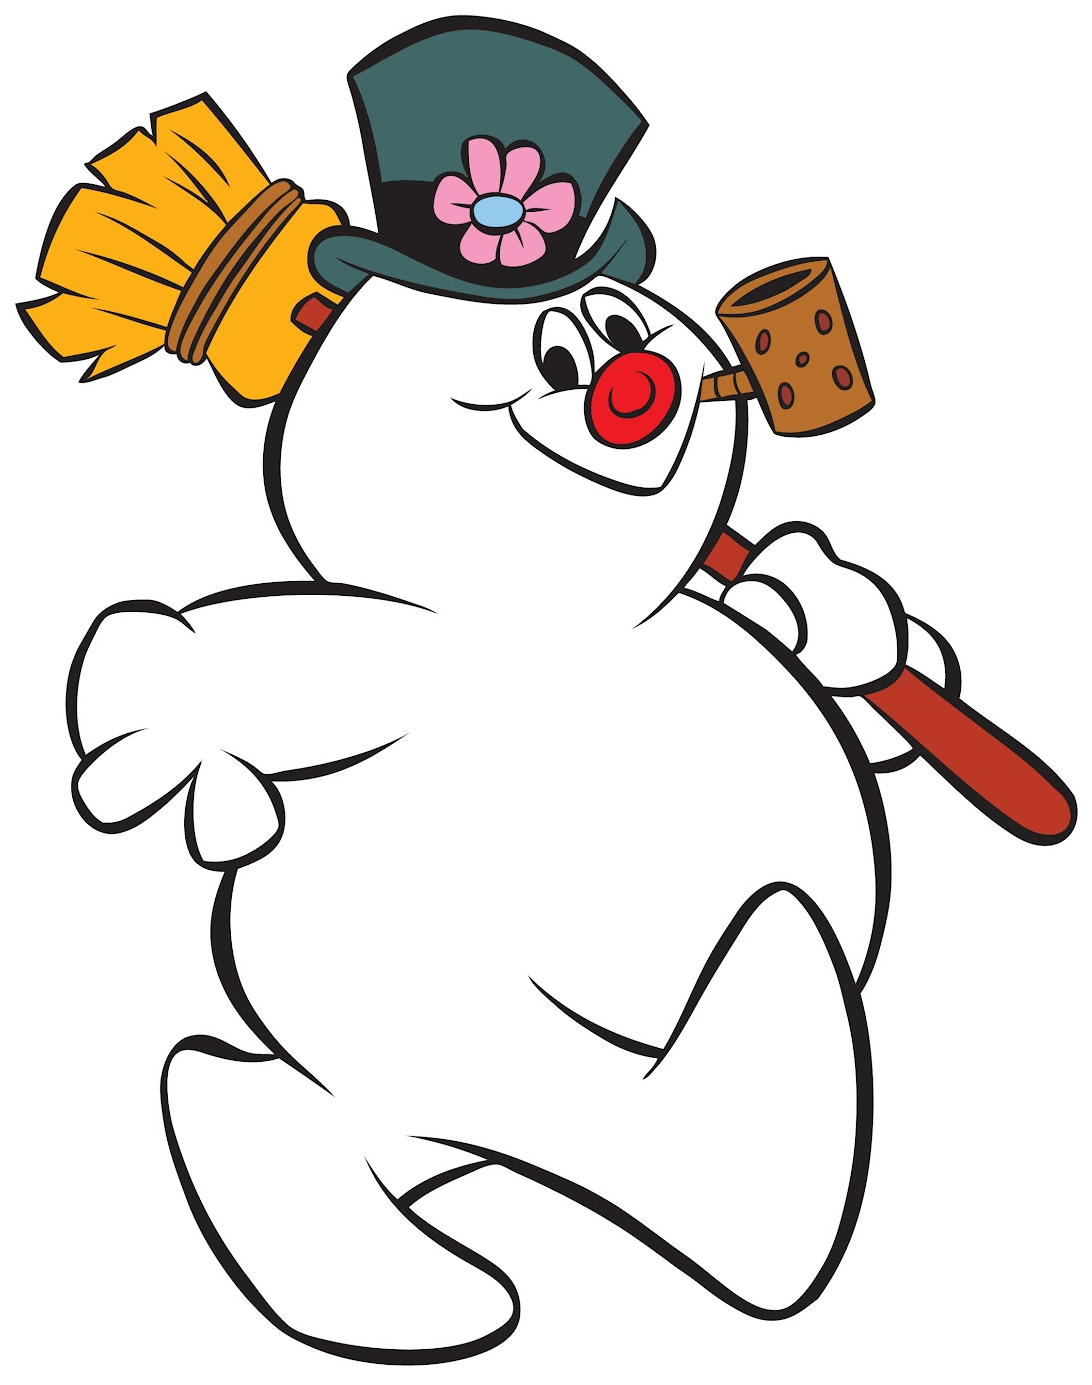 Frosty the Snowman. 